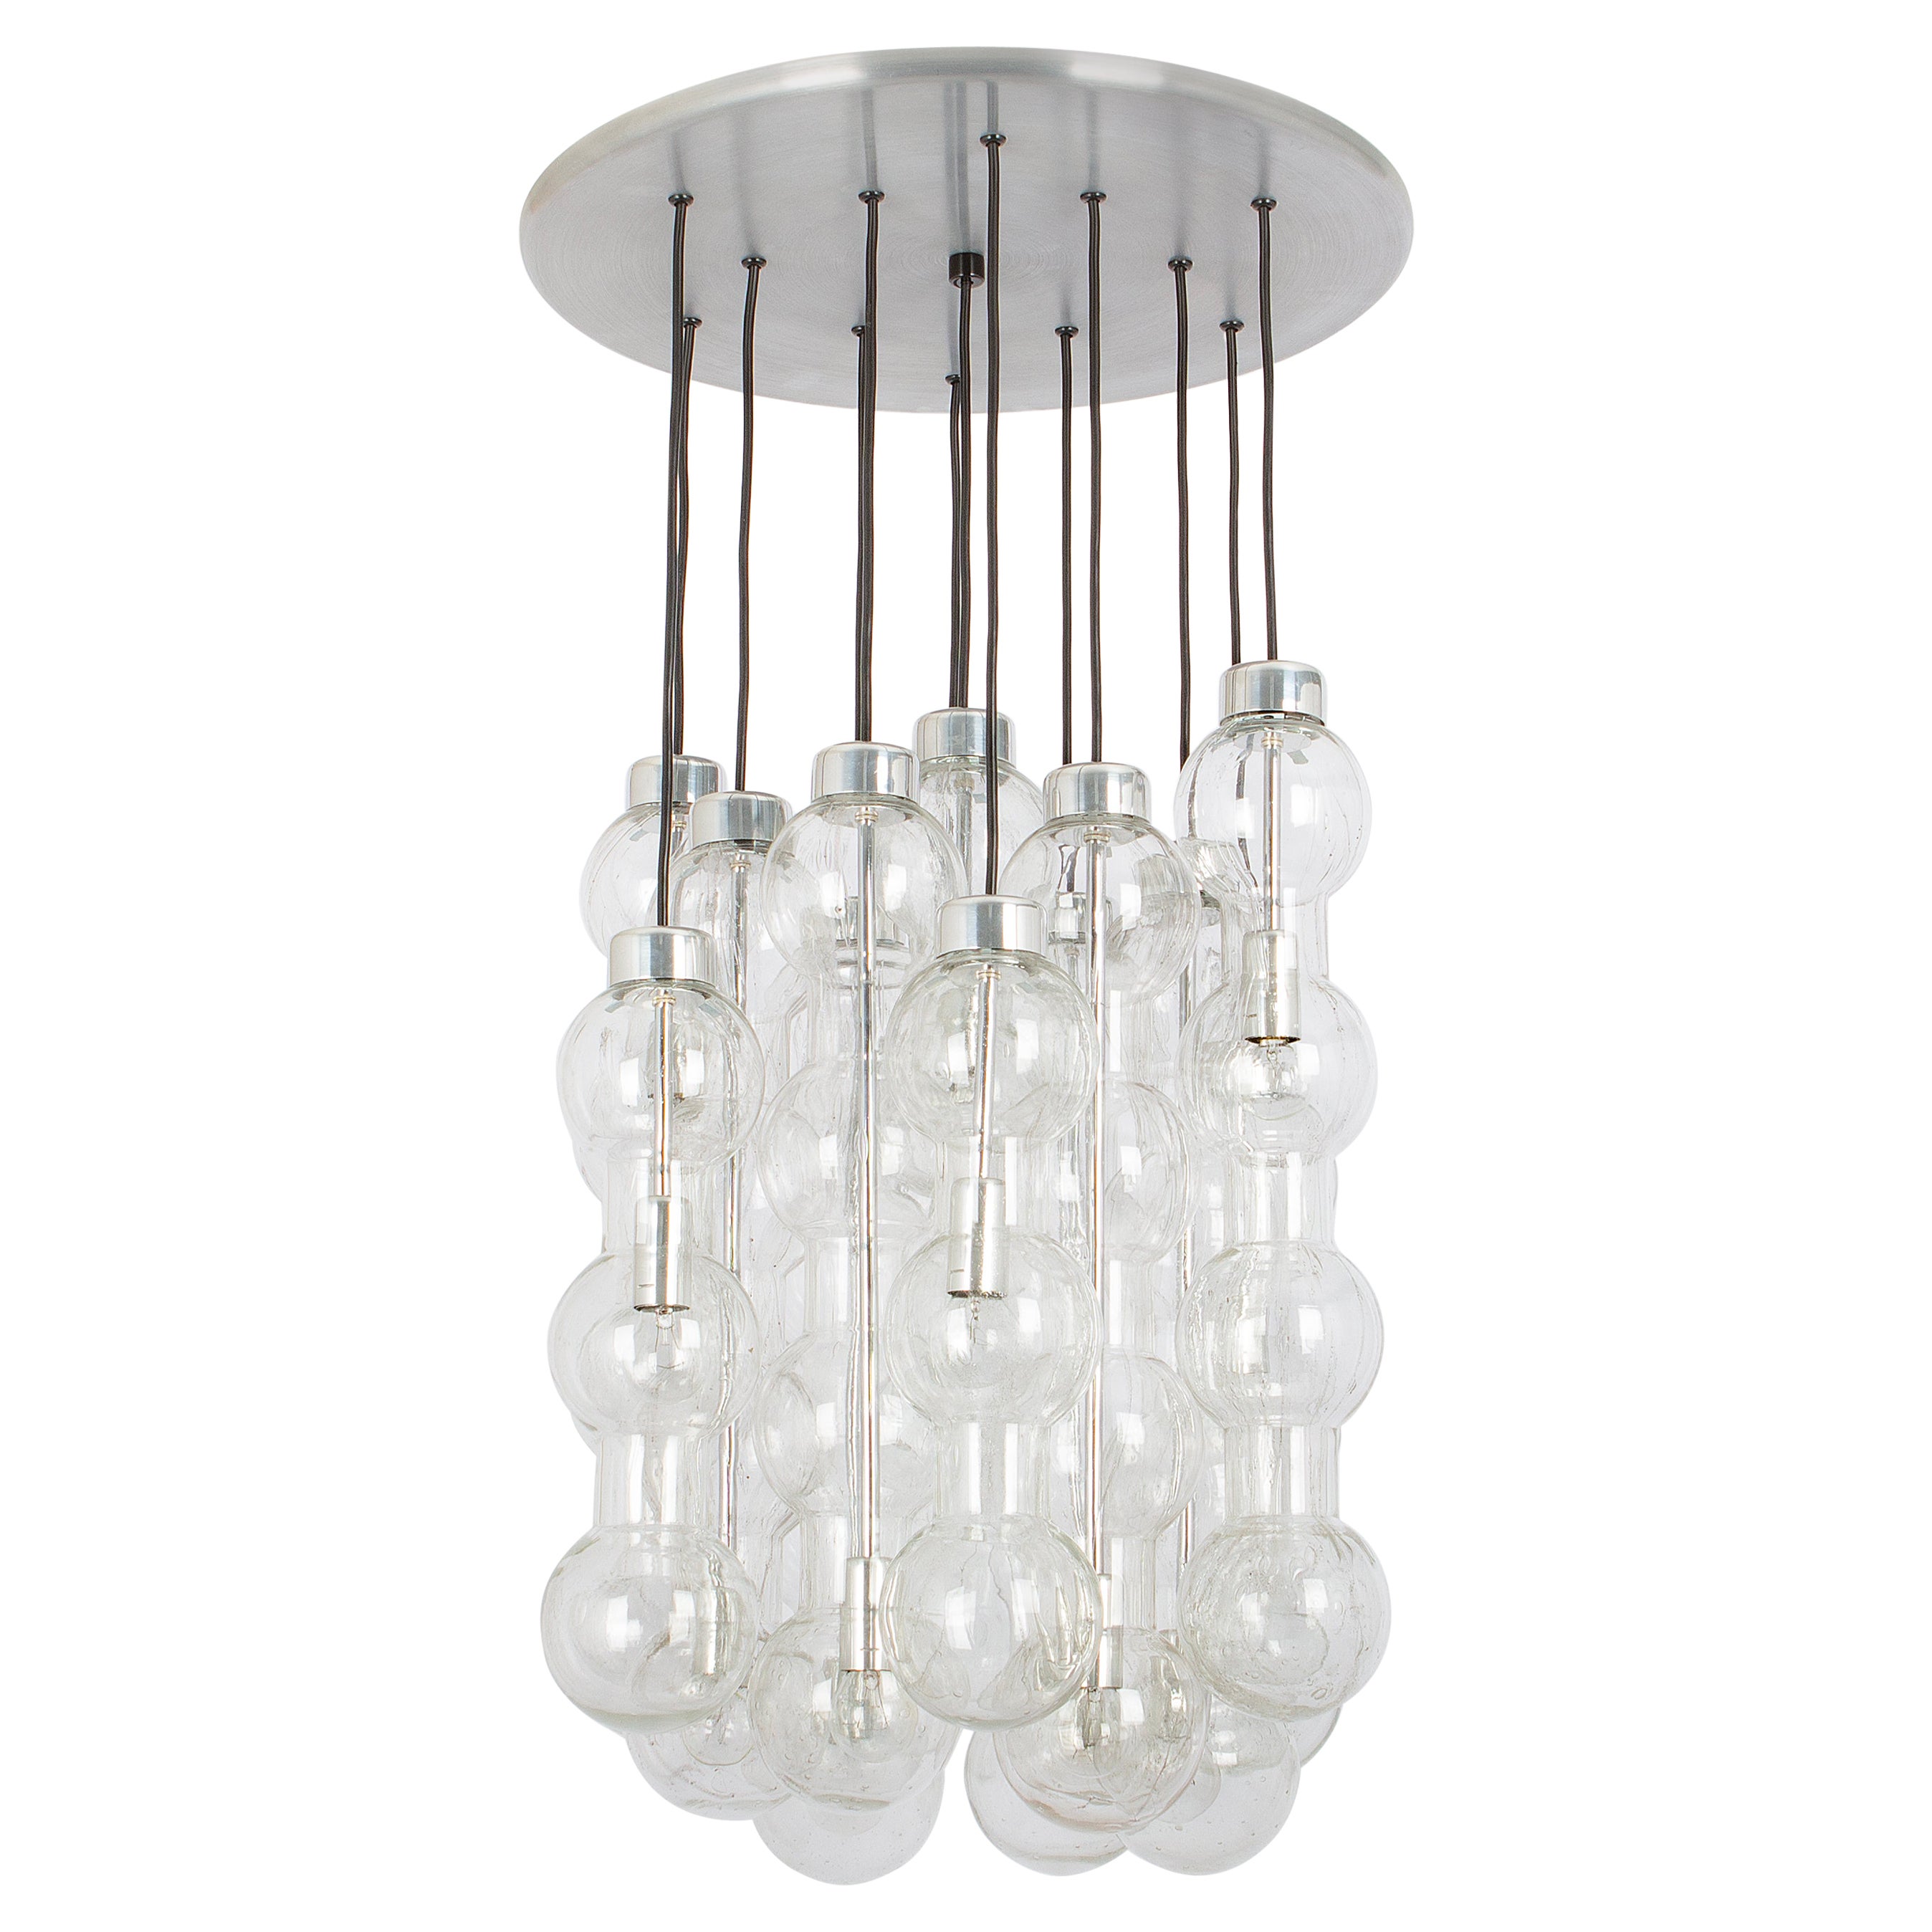 Large Designer Cascading Chandelier Murano Glass by Doria, Germany, 1970s For Sale